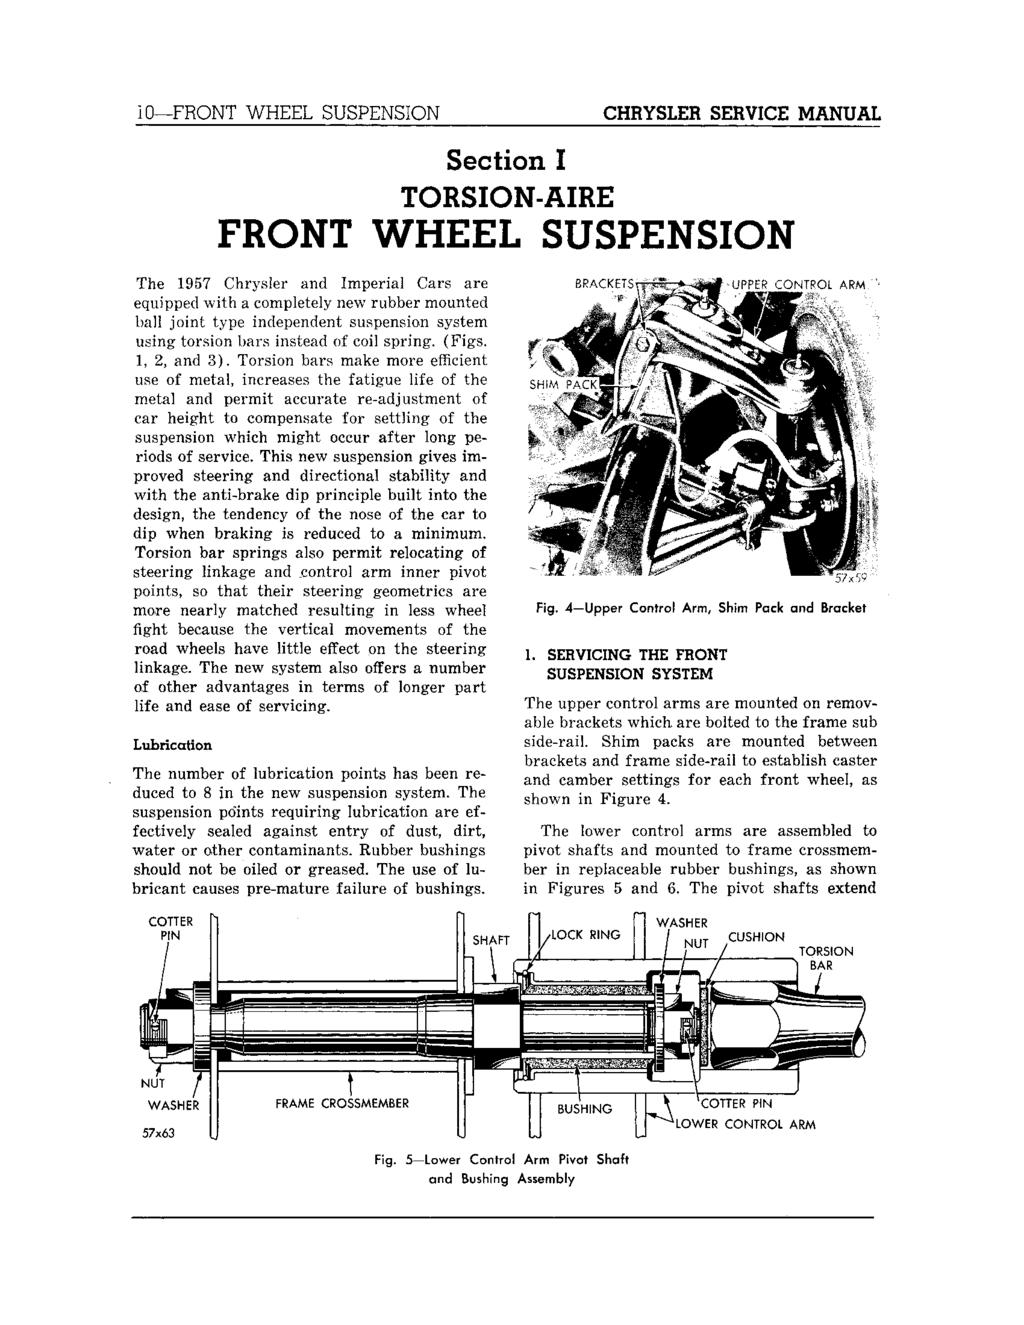 10 FRONT WHEEL SUSPENSION CHRYSLER SERVICE MANUAL Section I TORSION-AIRE FRONT WHEEL SUSPENSION The 1957 Chrysler and Imperial Cars are equipped with a completely new rubber mounted ball joint type